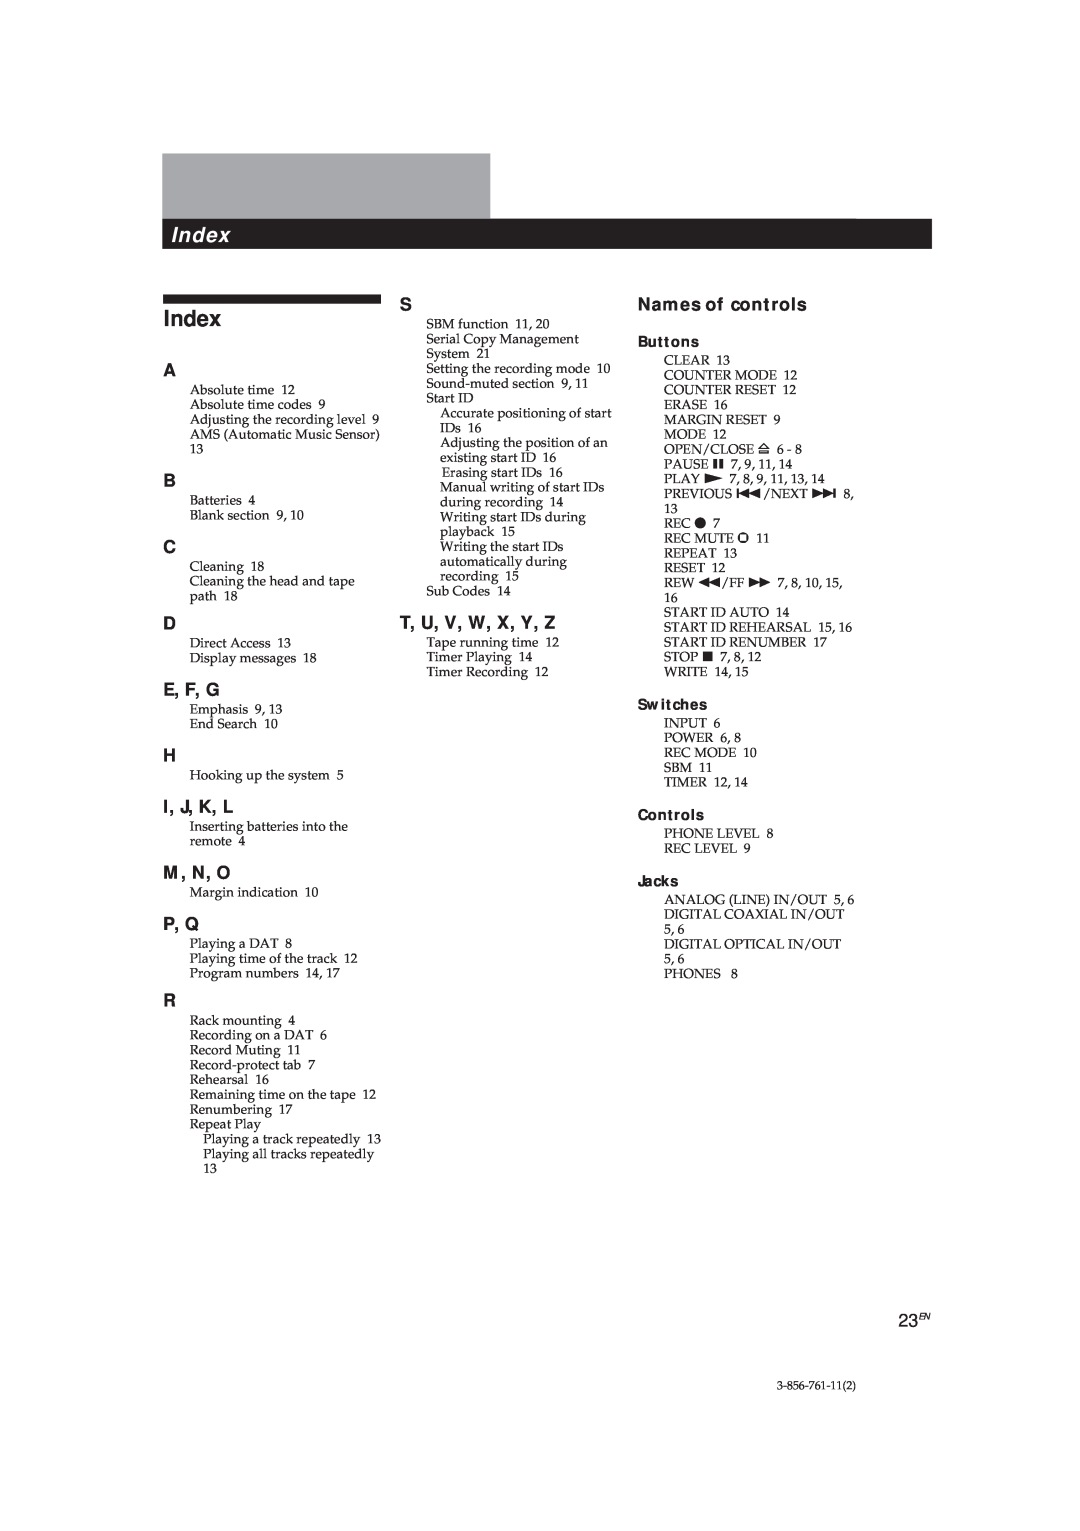 Sony DTC-A6 operating instructions Index, Names of controls, E, F, G, I, J, K, L, M, N, O, P, Q, T, U, V, W, X, Y, Z 